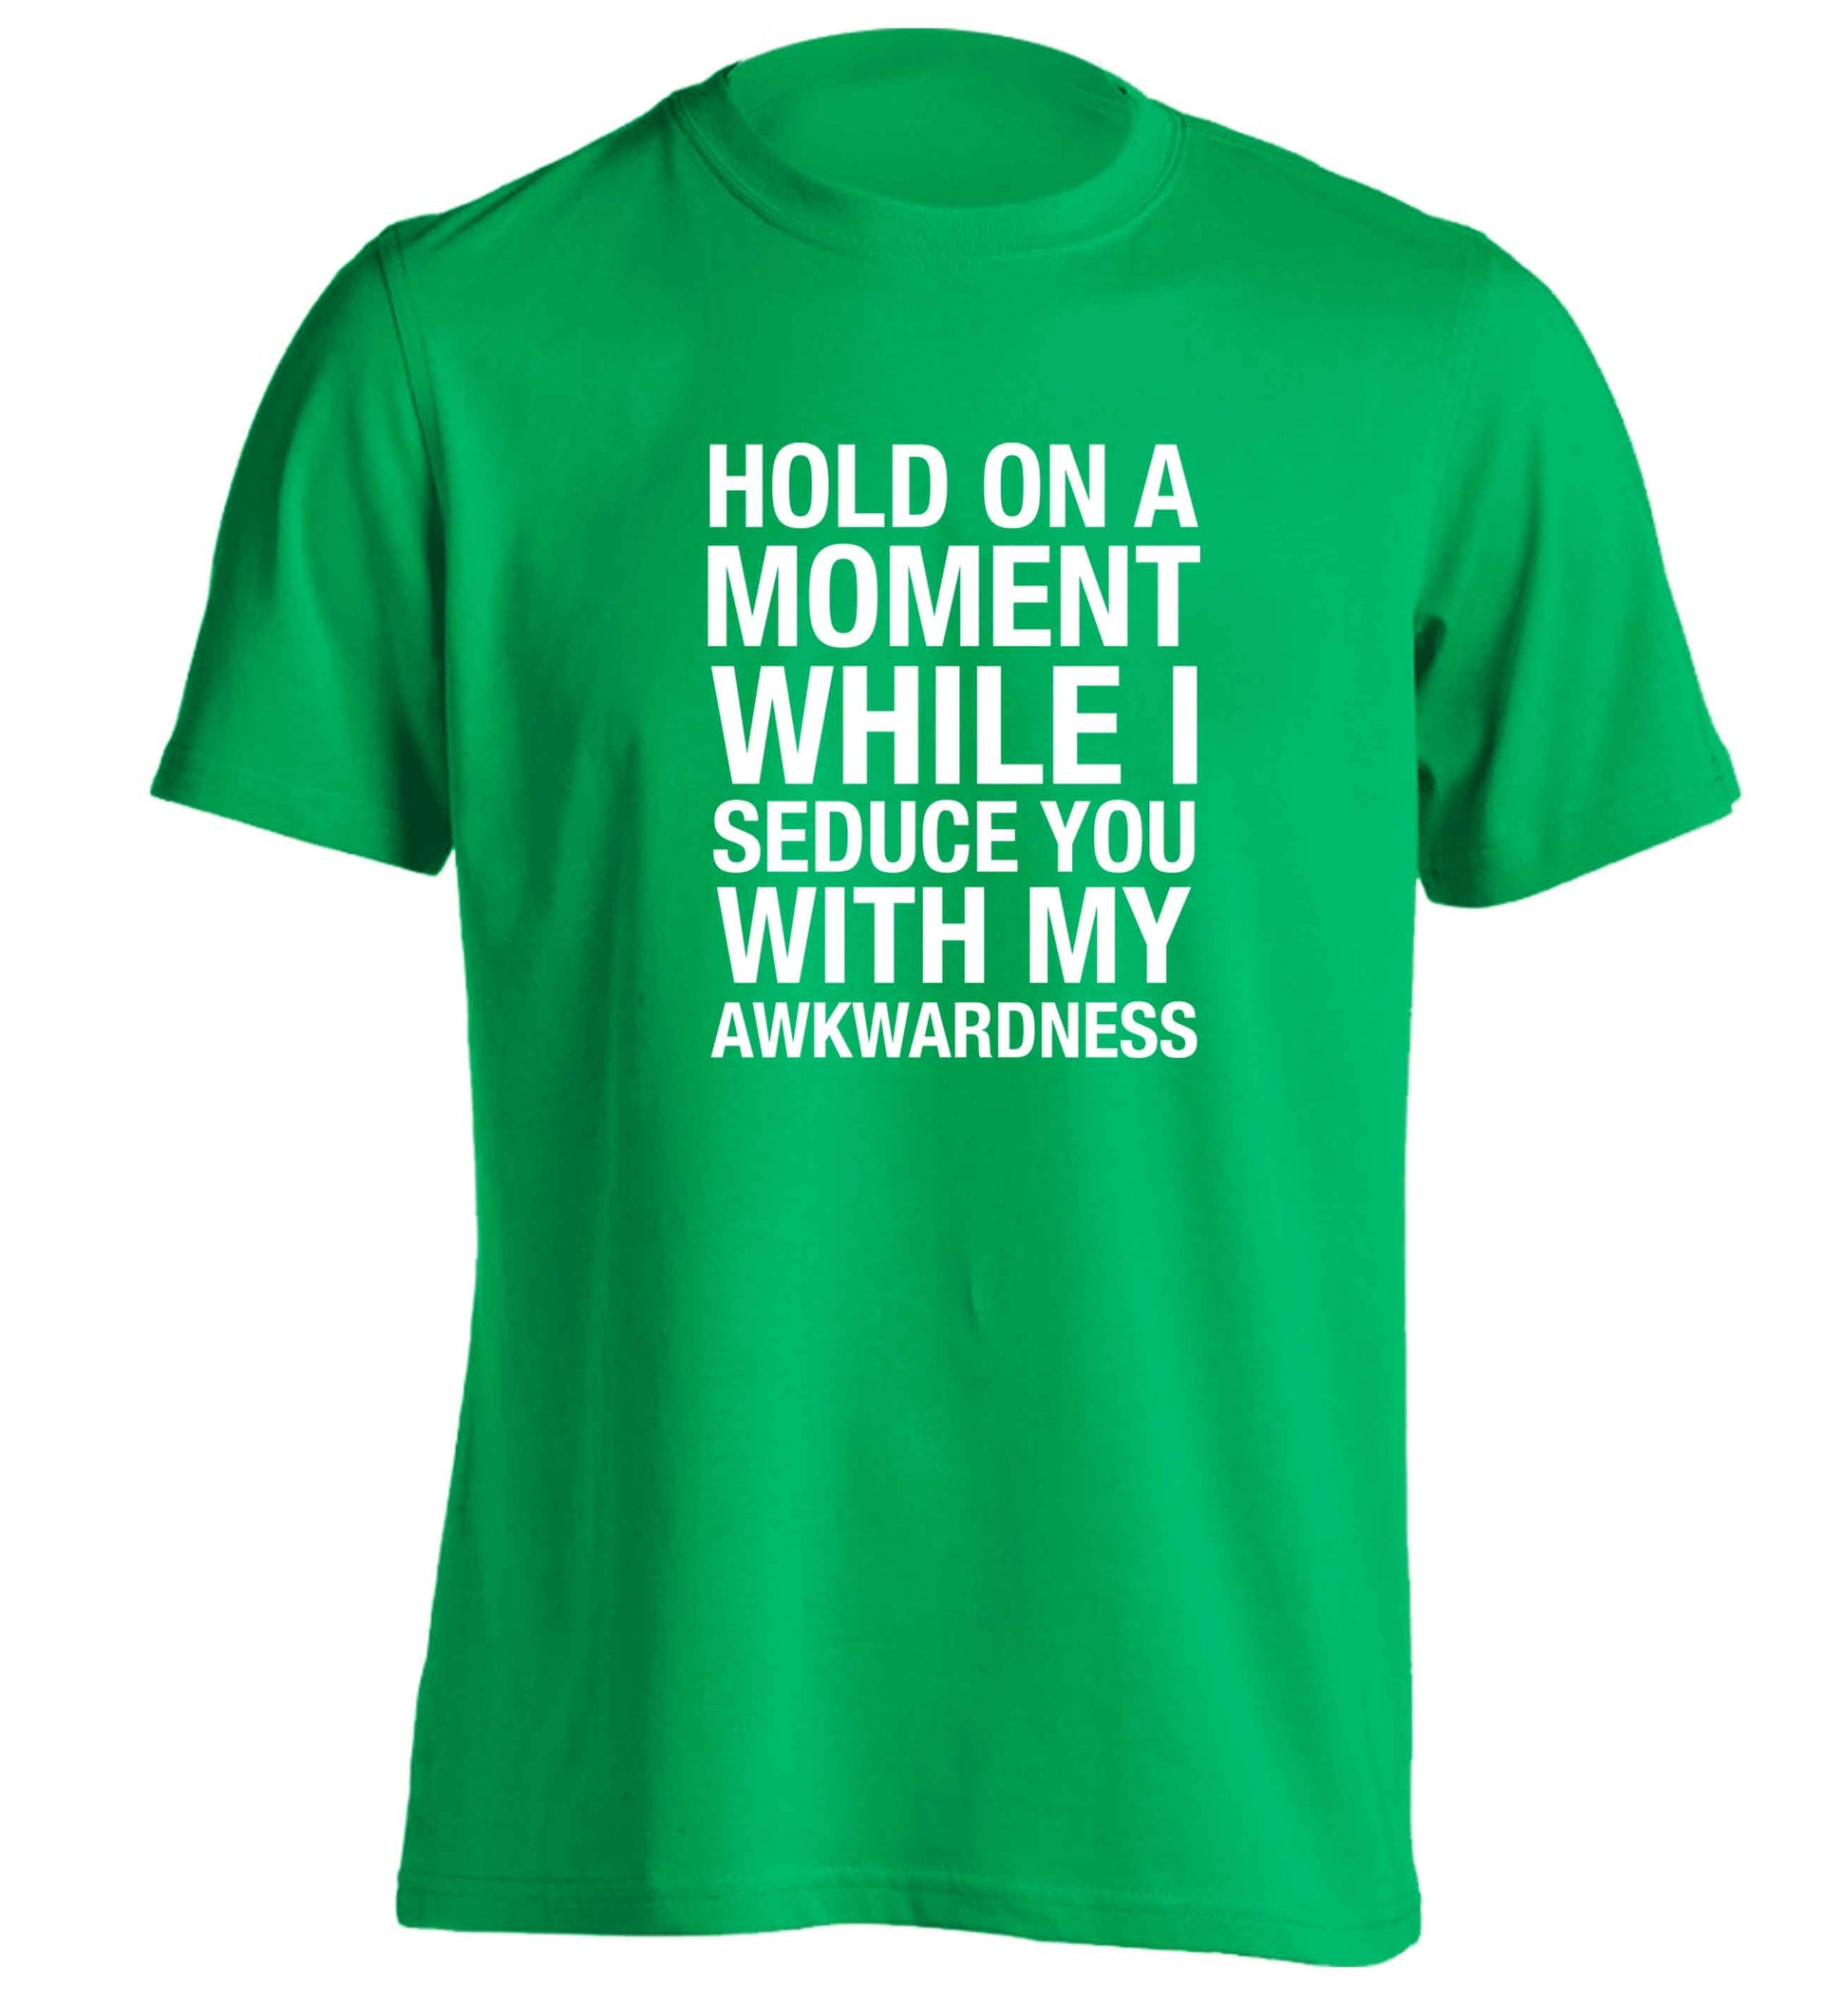 Hold on a moment while I seduce you with my awkwardness adults unisex green Tshirt 2XL